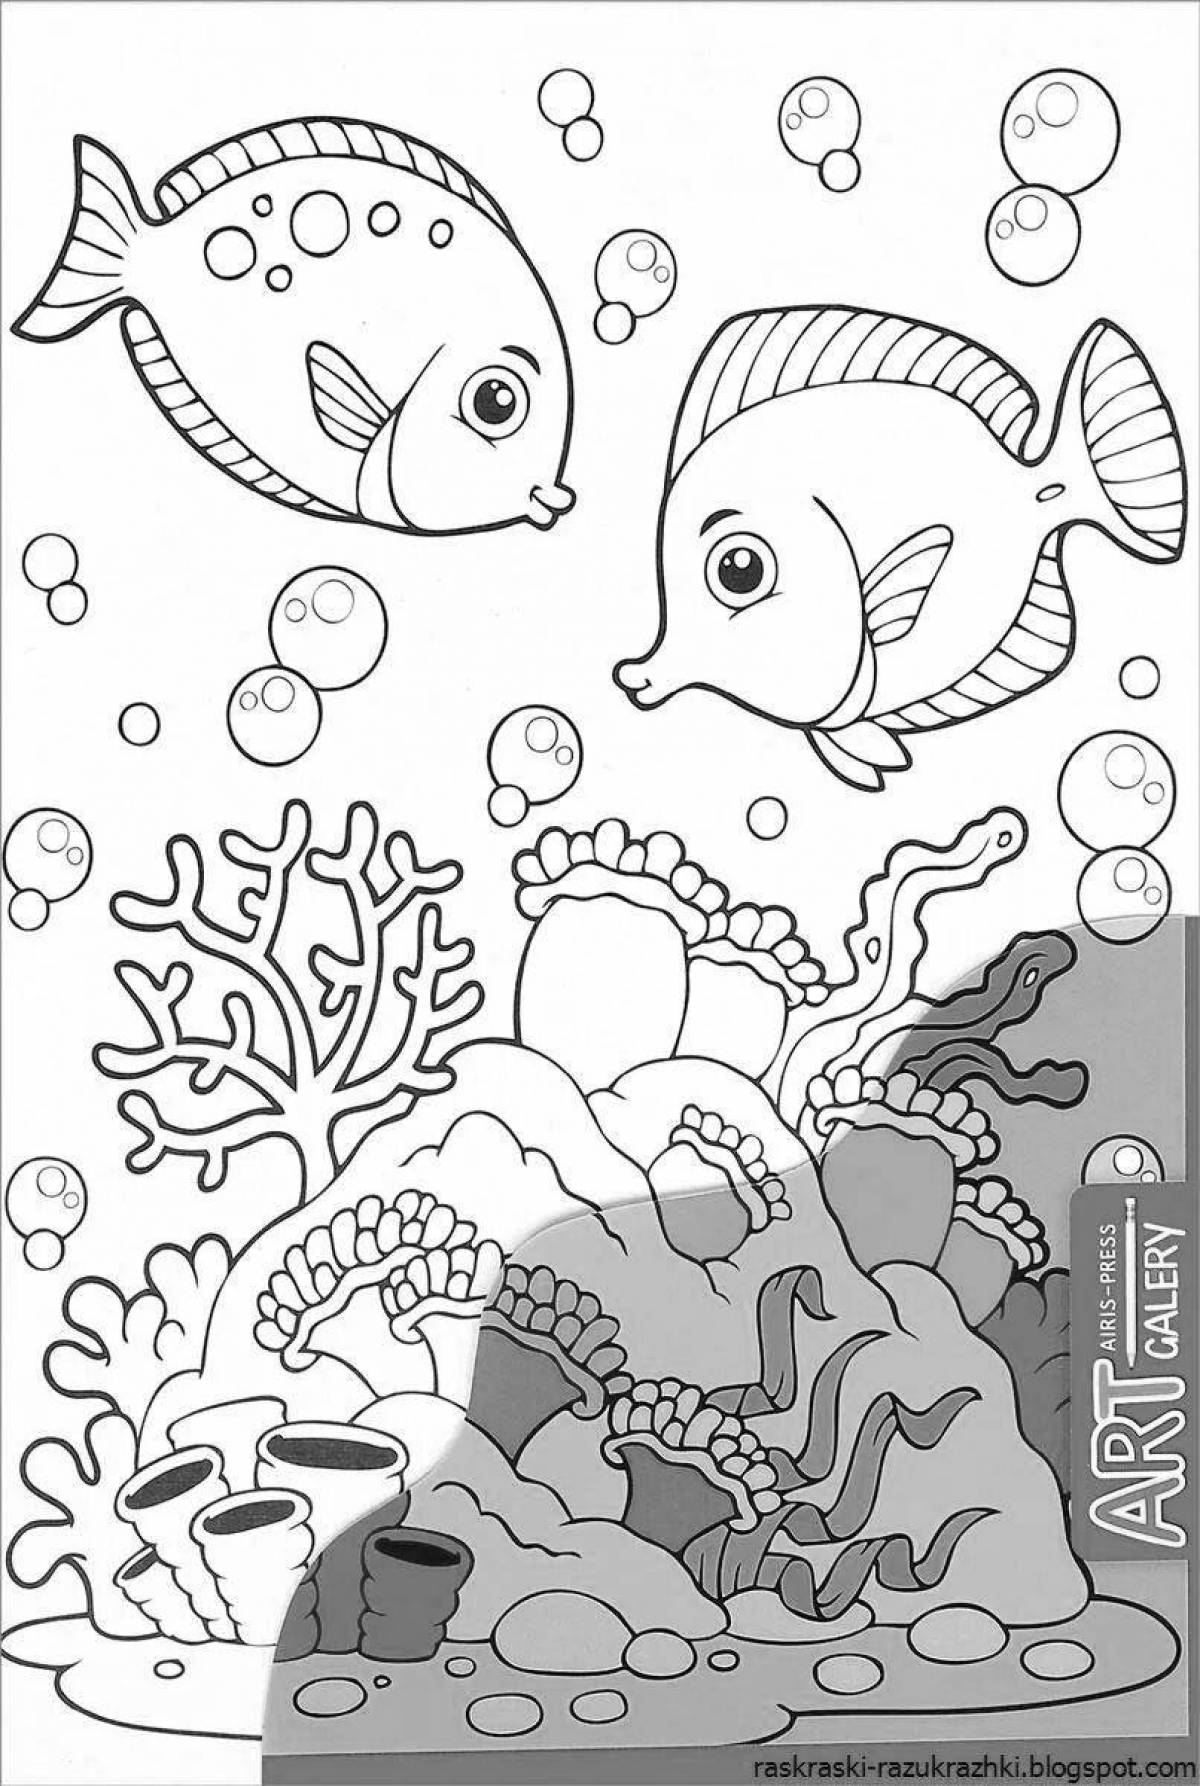 Seabed for kids #2